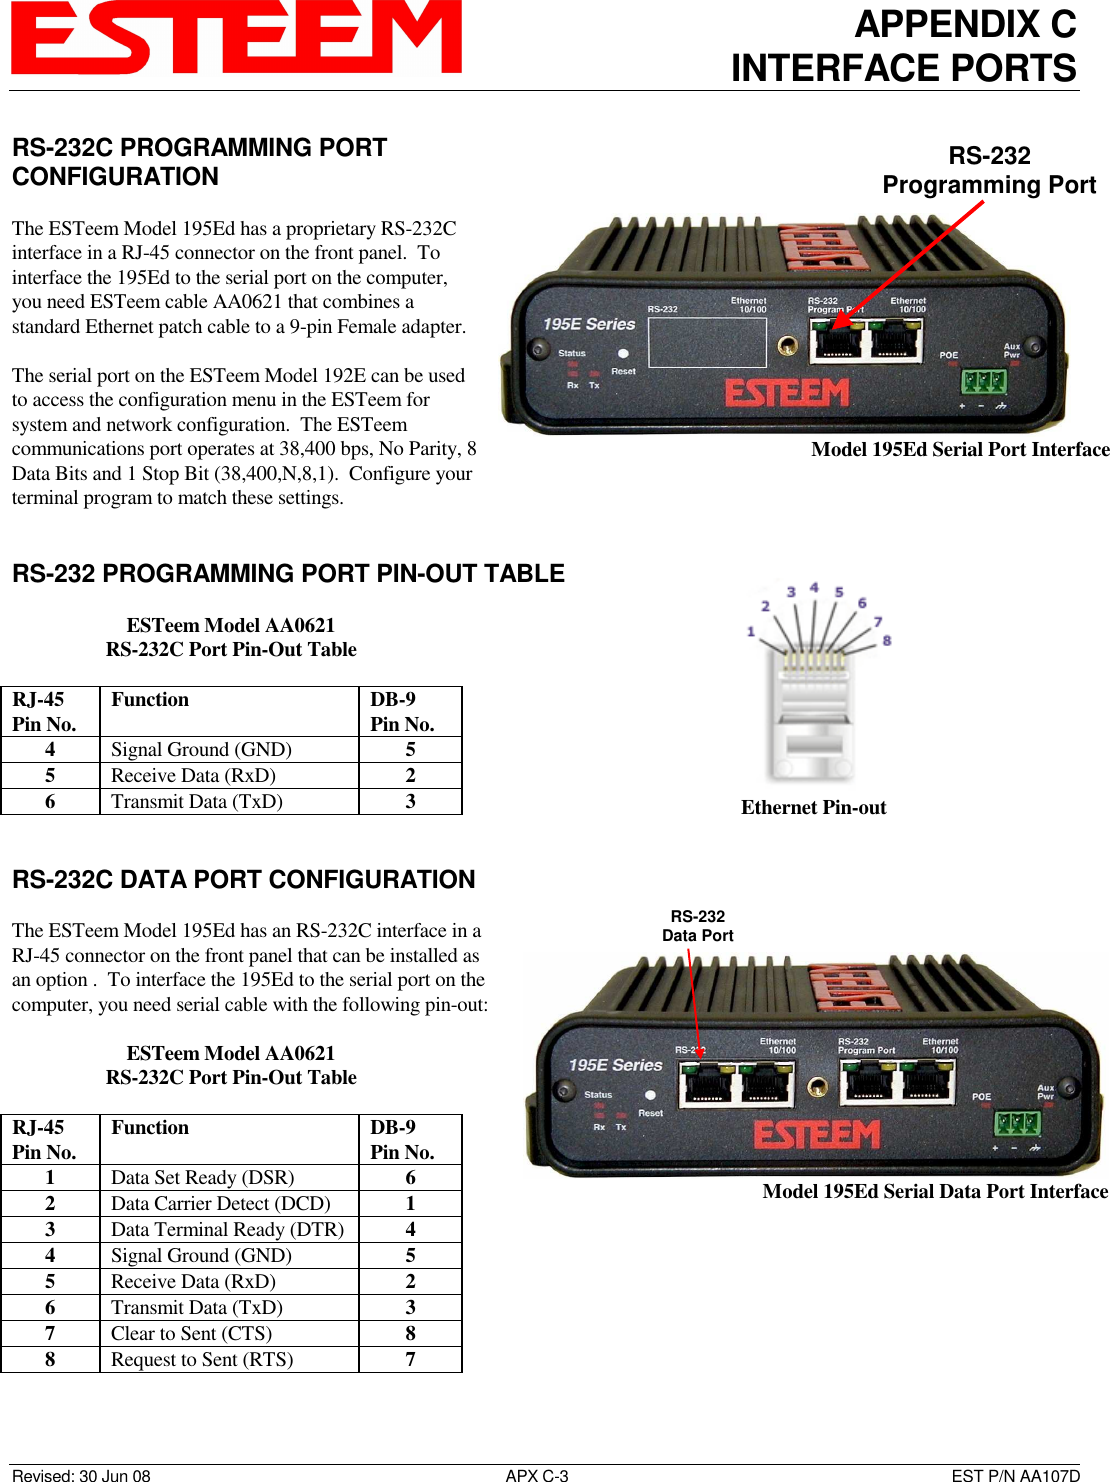 APPENDIX C INTERFACE PORTS   Revised: 30 Jun 08  APX C-3  EST P/N AA107D RS-232C PROGRAMMING PORT CONFIGURATION  The ESTeem Model 195Ed has a proprietary RS-232C interface in a RJ-45 connector on the front panel.  To interface the 195Ed to the serial port on the computer, you need ESTeem cable AA0621 that combines a standard Ethernet patch cable to a 9-pin Female adapter.  The serial port on the ESTeem Model 192E can be used to access the configuration menu in the ESTeem for system and network configuration.  The ESTeem communications port operates at 38,400 bps, No Parity, 8 Data Bits and 1 Stop Bit (38,400,N,8,1).  Configure your terminal program to match these settings.   RS-232 PROGRAMMING PORT PIN-OUT TABLE  ESTeem Model AA0621 RS-232C Port Pin-Out Table  RJ-45 Pin No.  Function  DB-9 Pin No. 4  Signal Ground (GND)  5 5  Receive Data (RxD)  2 6  Transmit Data (TxD)  3   RS-232C DATA PORT CONFIGURATION  The ESTeem Model 195Ed has an RS-232C interface in a RJ-45 connector on the front panel that can be installed as an option .  To interface the 195Ed to the serial port on the computer, you need serial cable with the following pin-out:  ESTeem Model AA0621 RS-232C Port Pin-Out Table  RJ-45 Pin No.  Function  DB-9 Pin No. 1  Data Set Ready (DSR)  6 2  Data Carrier Detect (DCD)  1 3  Data Terminal Ready (DTR)  4 4  Signal Ground (GND)  5 5  Receive Data (RxD)  2 6  Transmit Data (TxD)  3 7  Clear to Sent (CTS)  8 8  Request to Sent (RTS)  7  RS-232Programming Port Model 195Ed Serial Port Interface  Ethernet Pin-out RS-232Data Port Model 195Ed Serial Data Port Interface 